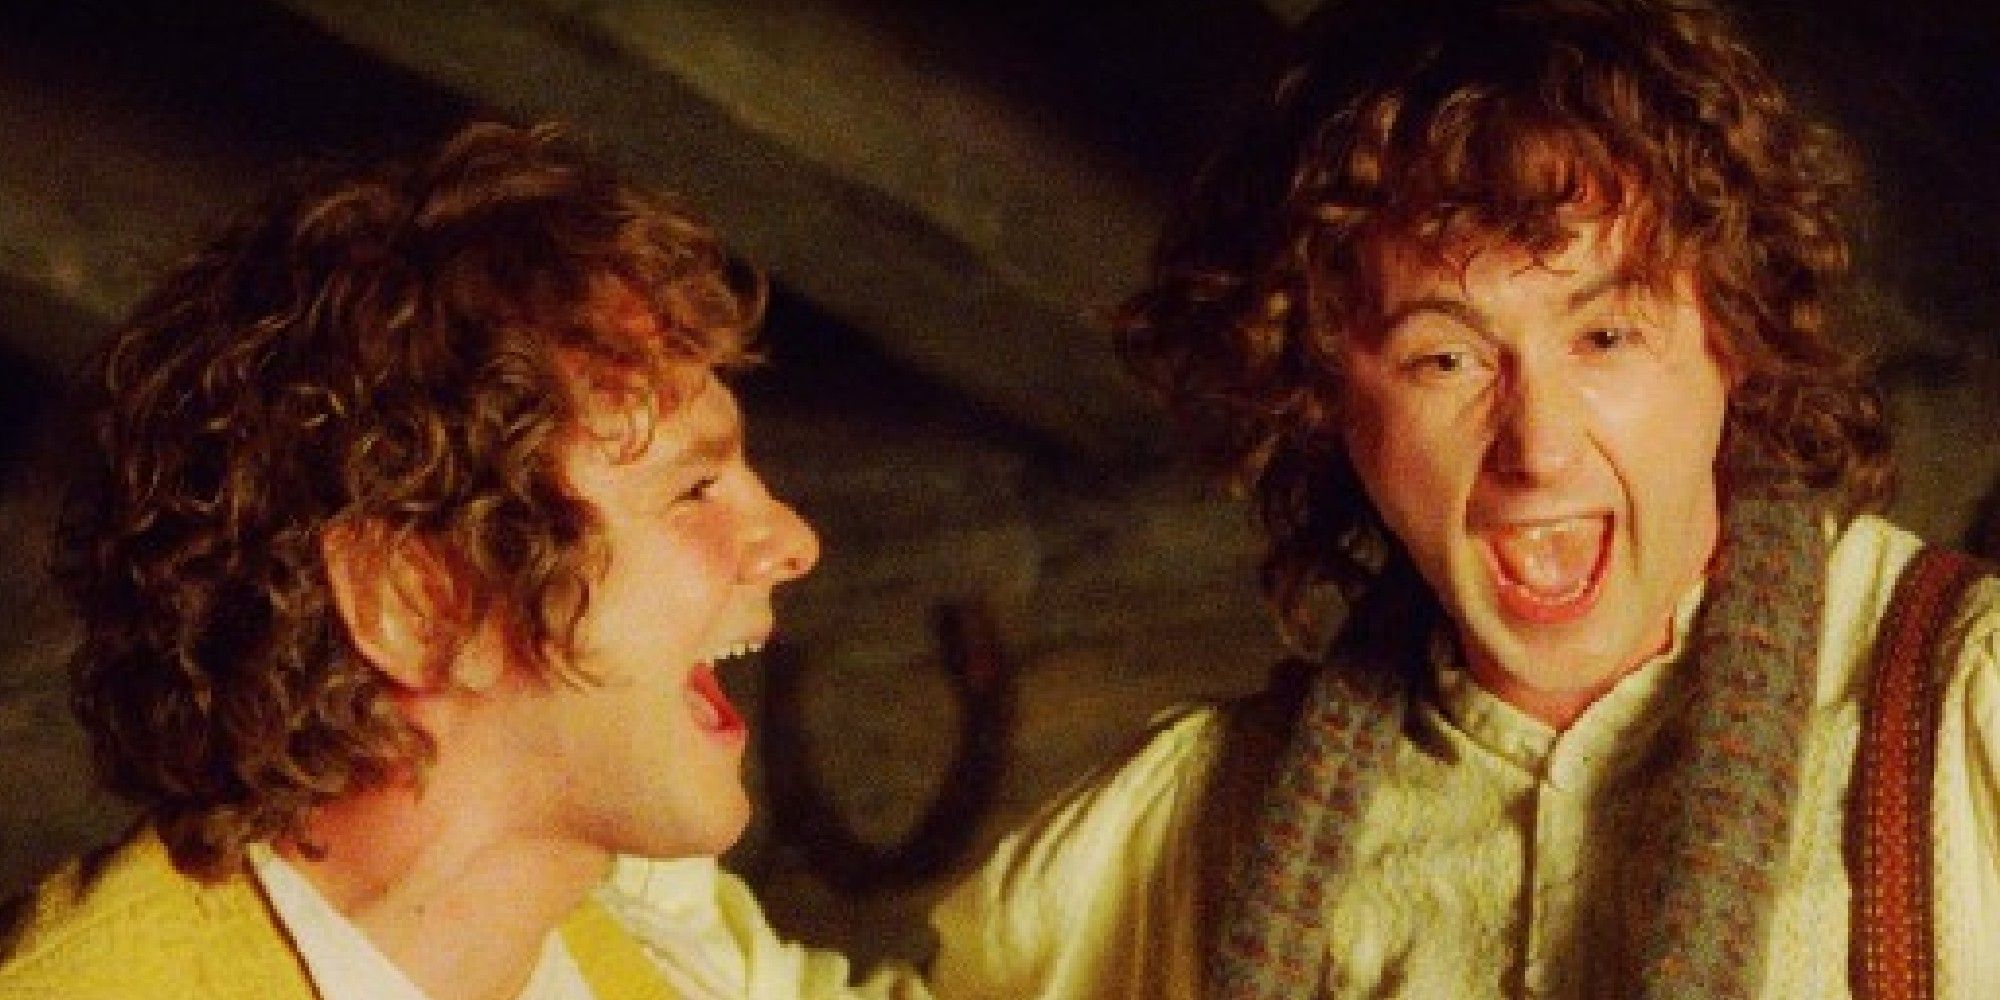 Merry and Pippin laughing together in Lord of the Rings